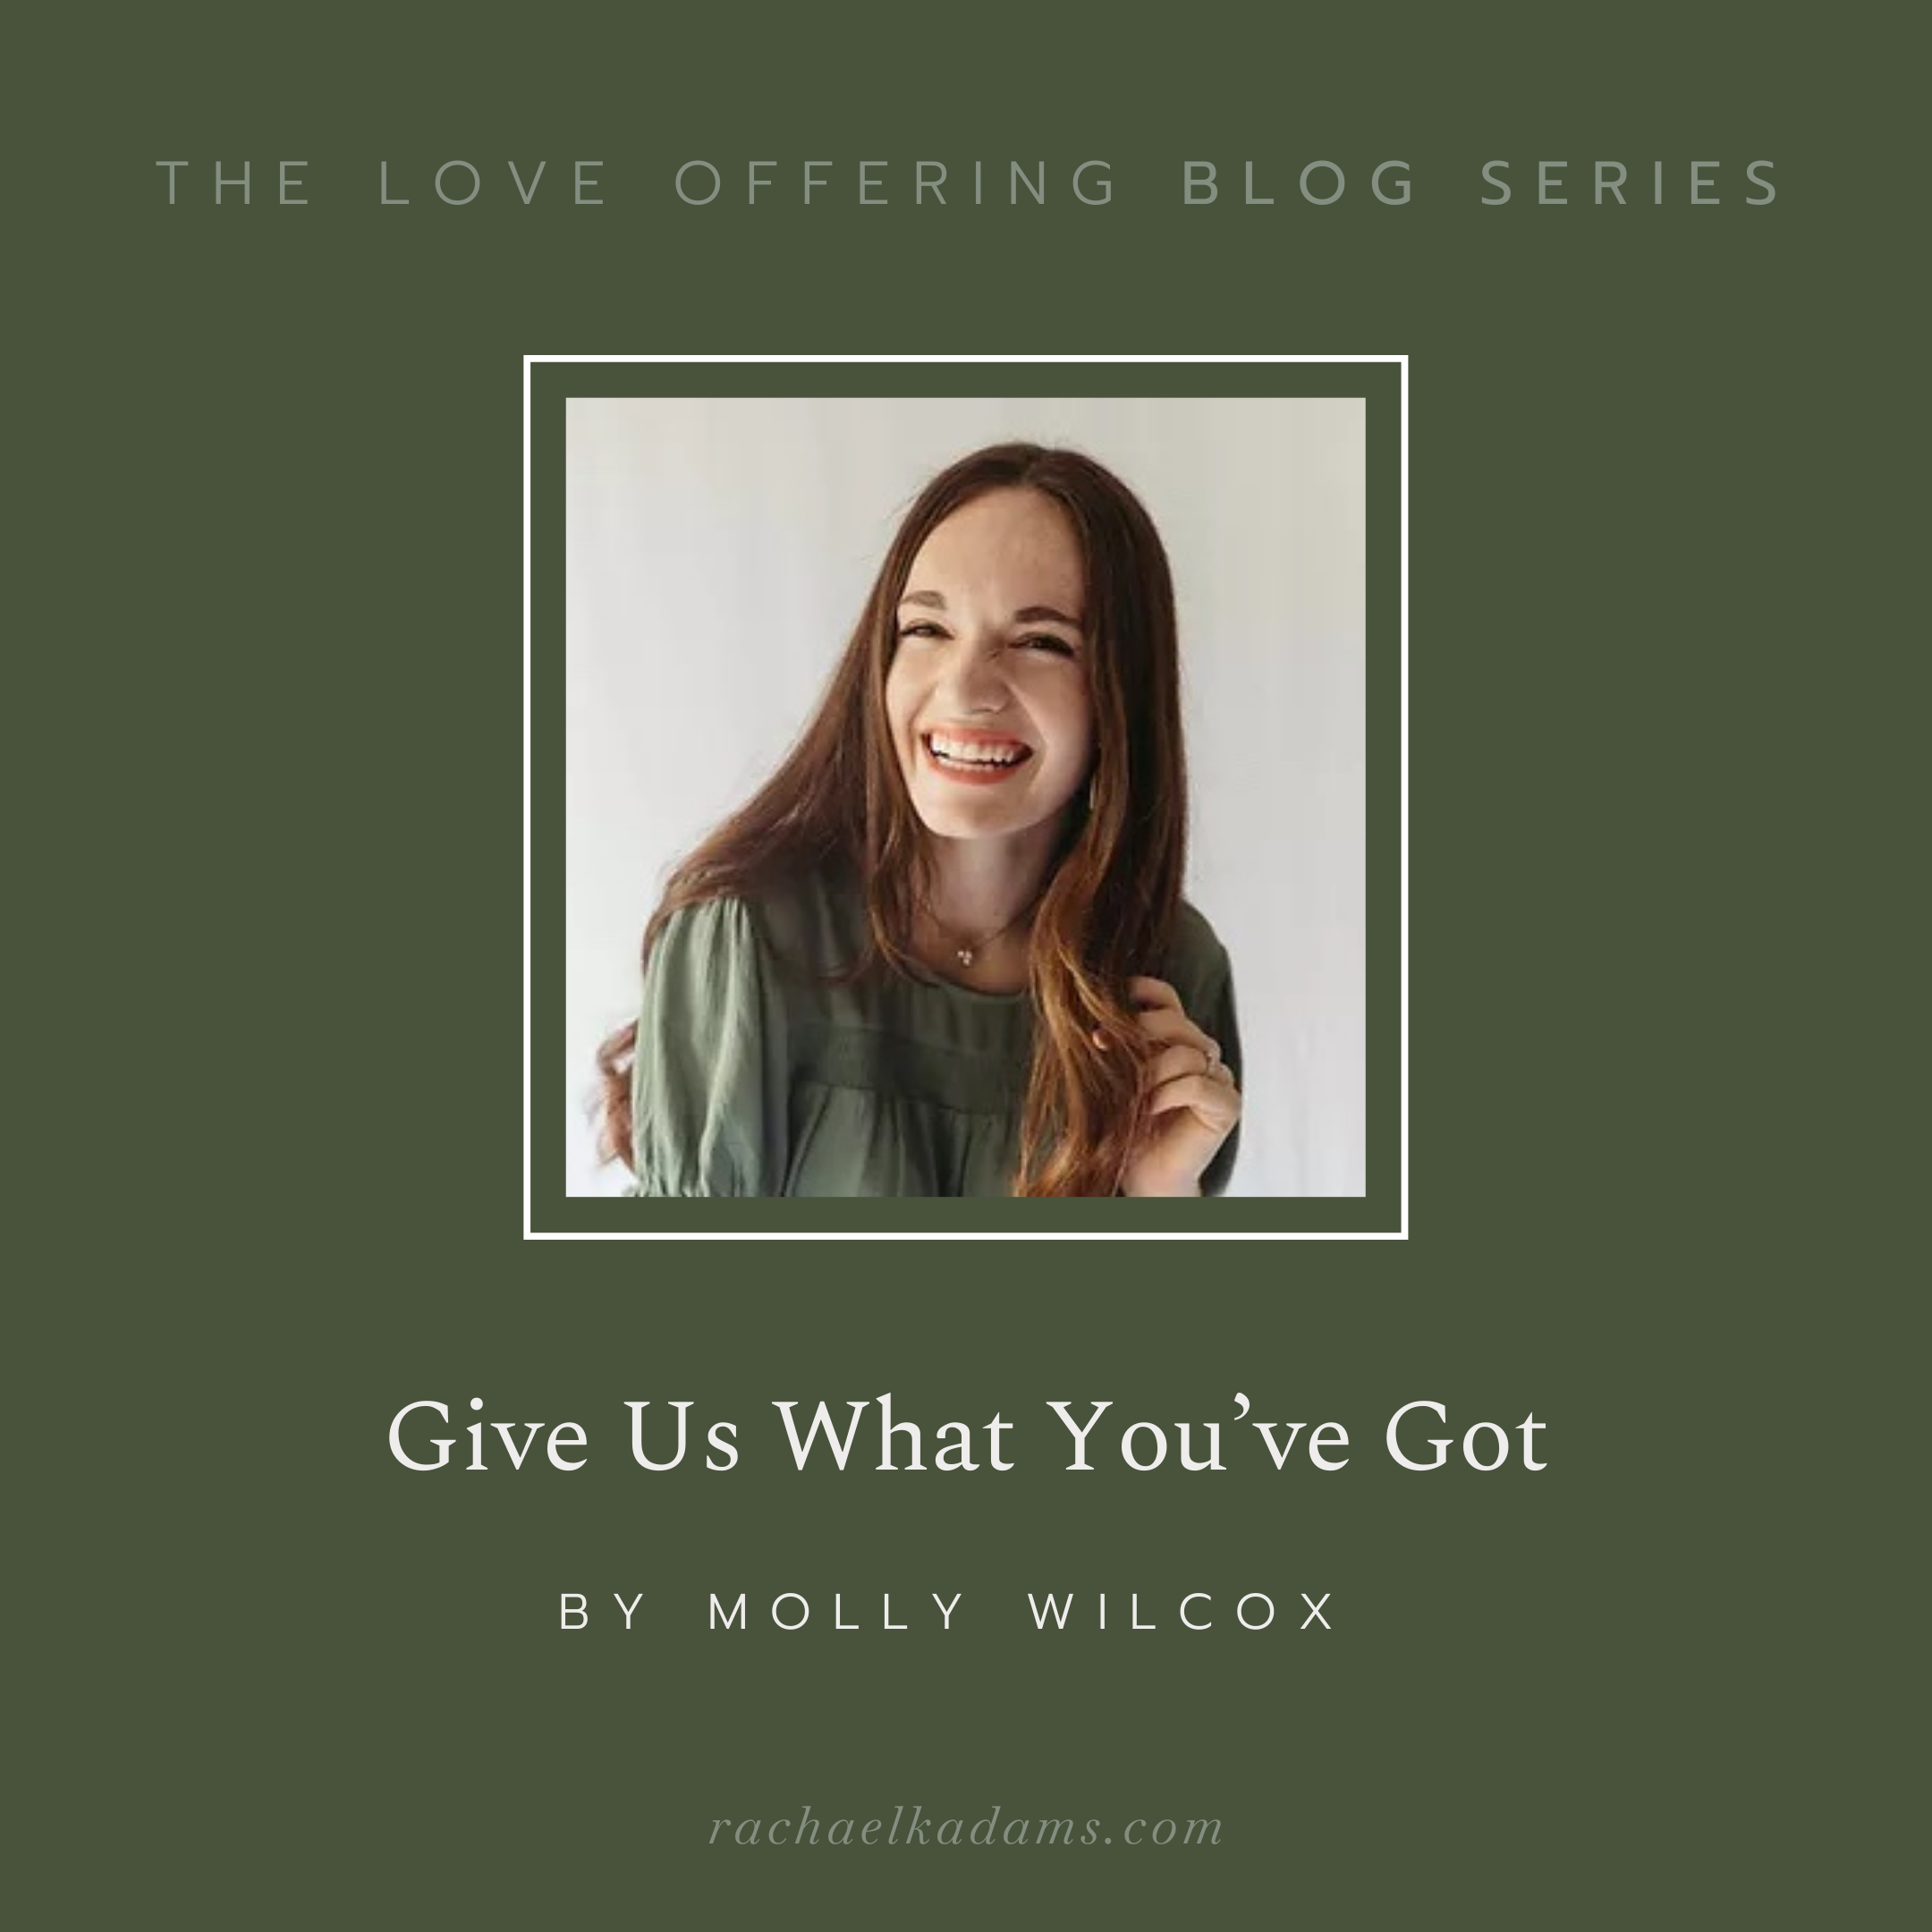 Give Us What You’ve Got by Molly Wilcox 